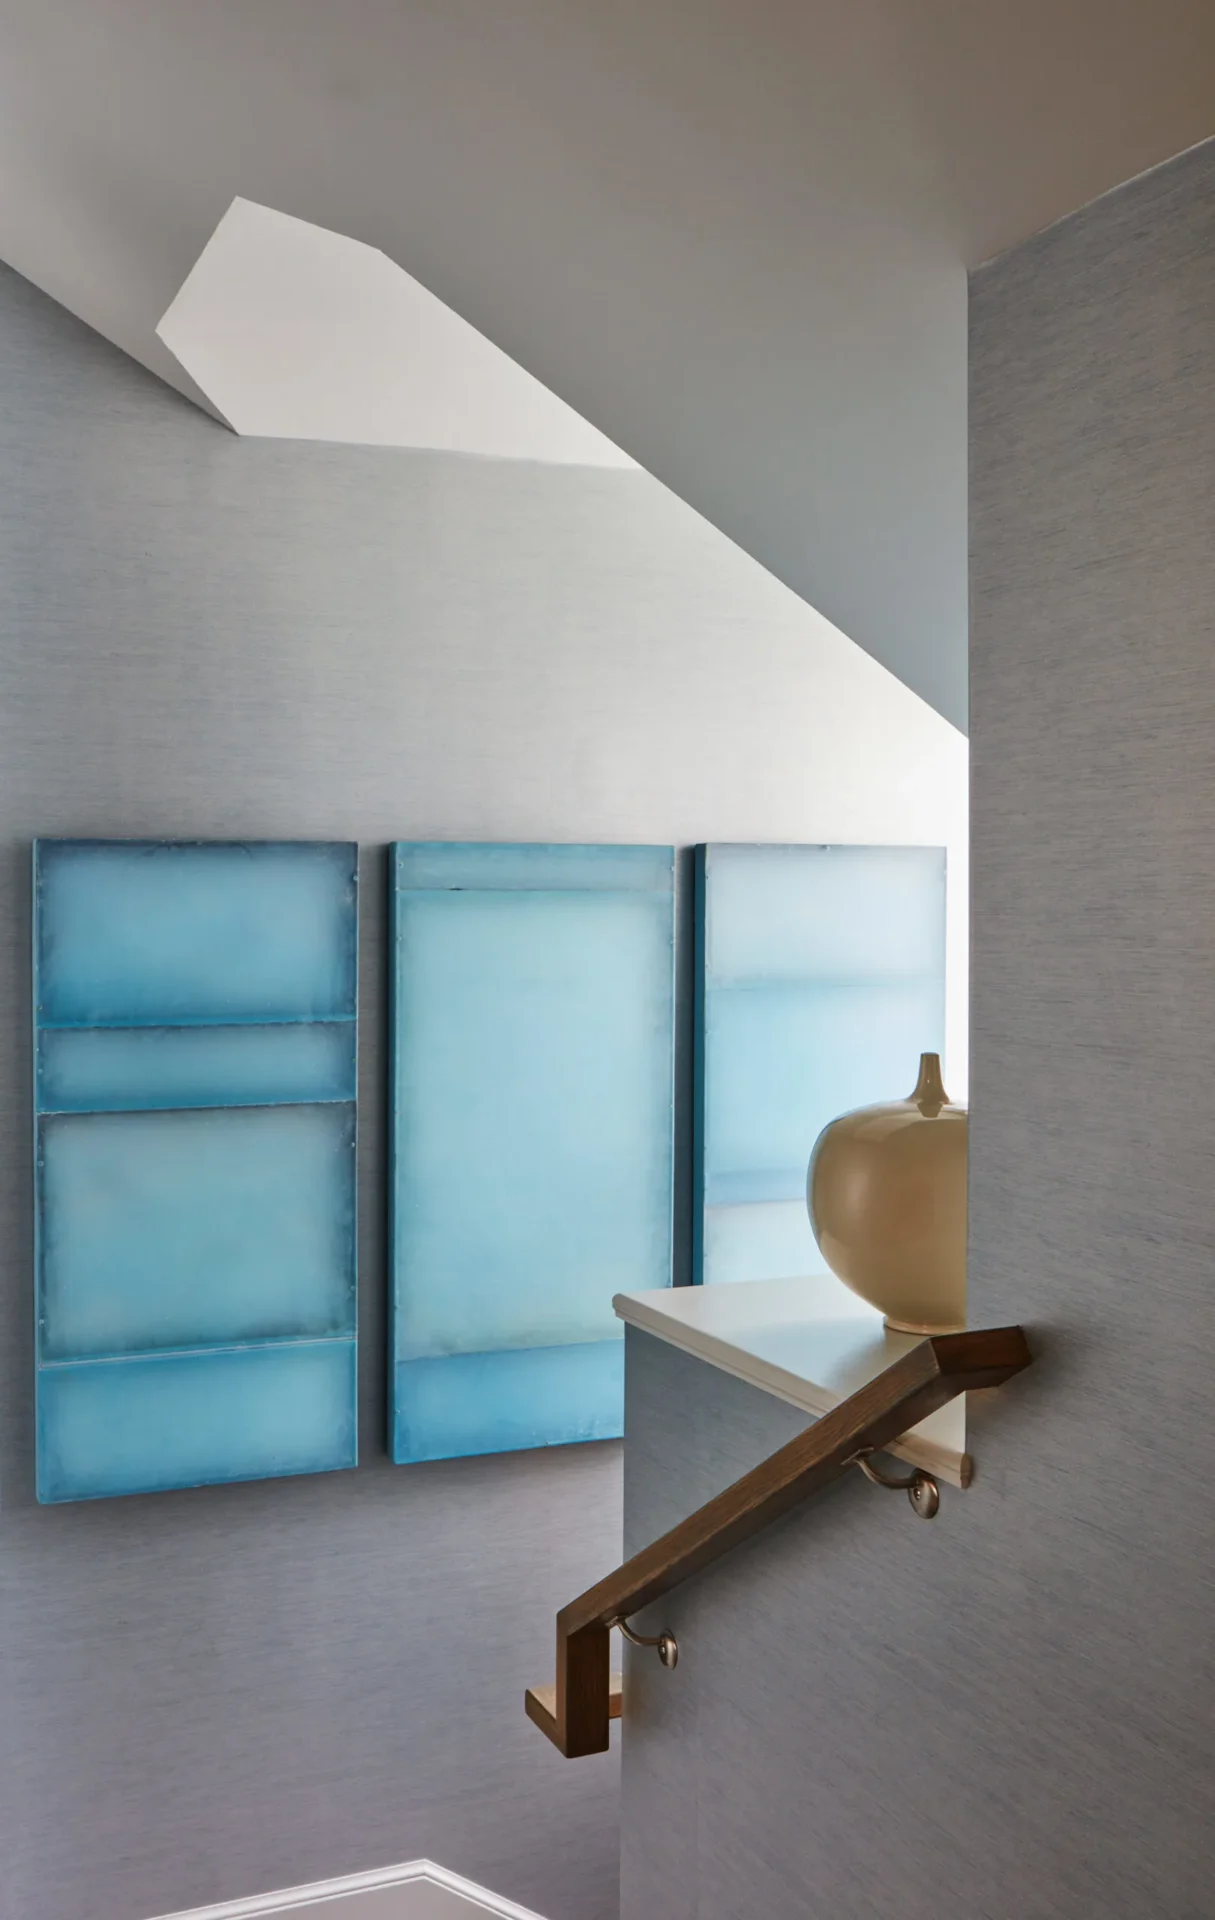 A wall with three blue panels and a vase on the ledge.